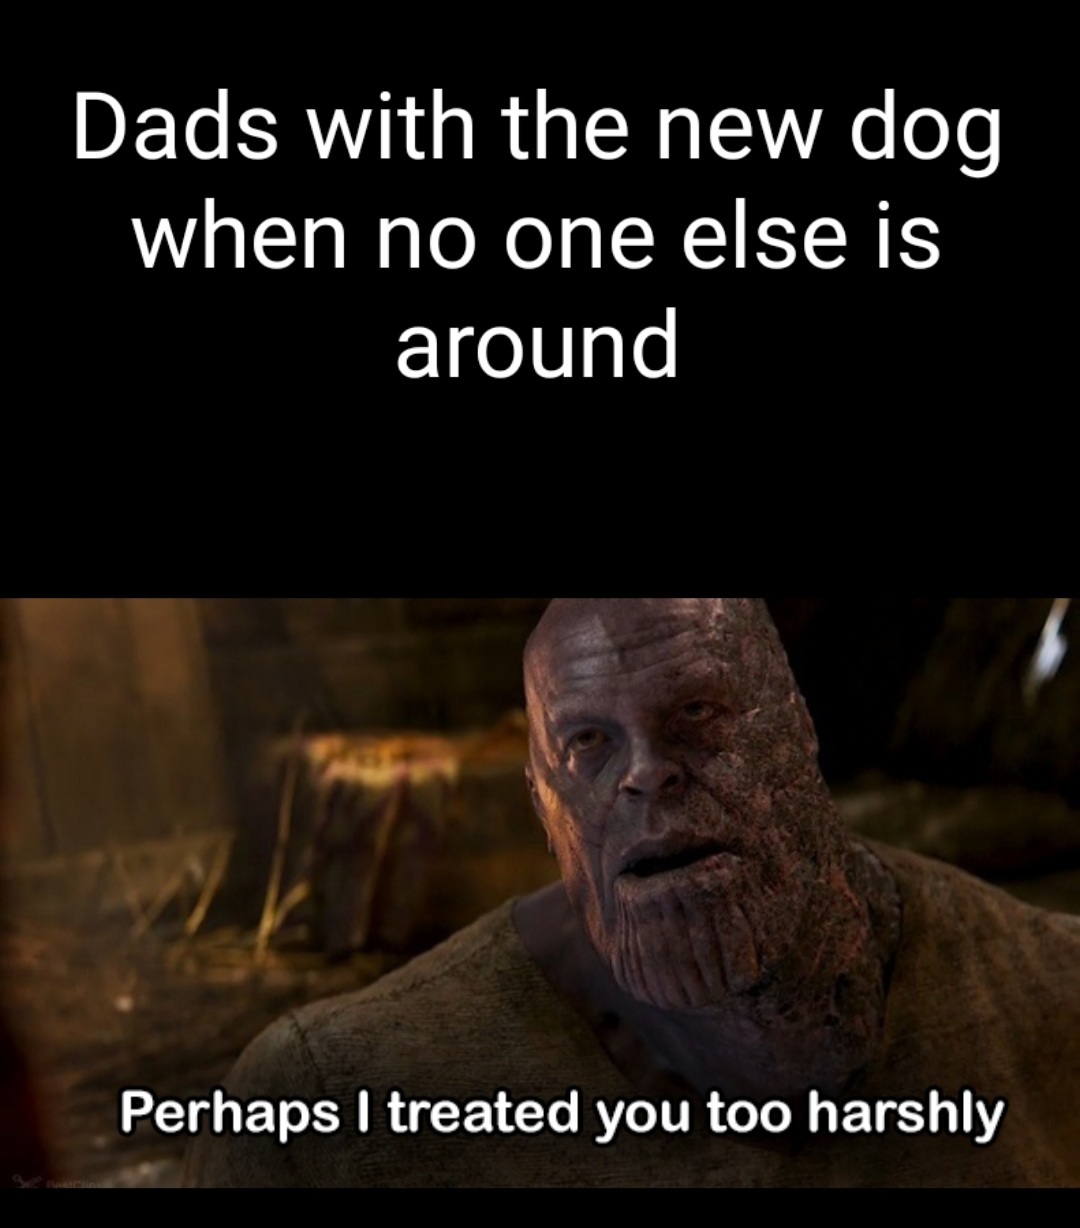 OC, came home to a new surprise puppy last night - meme